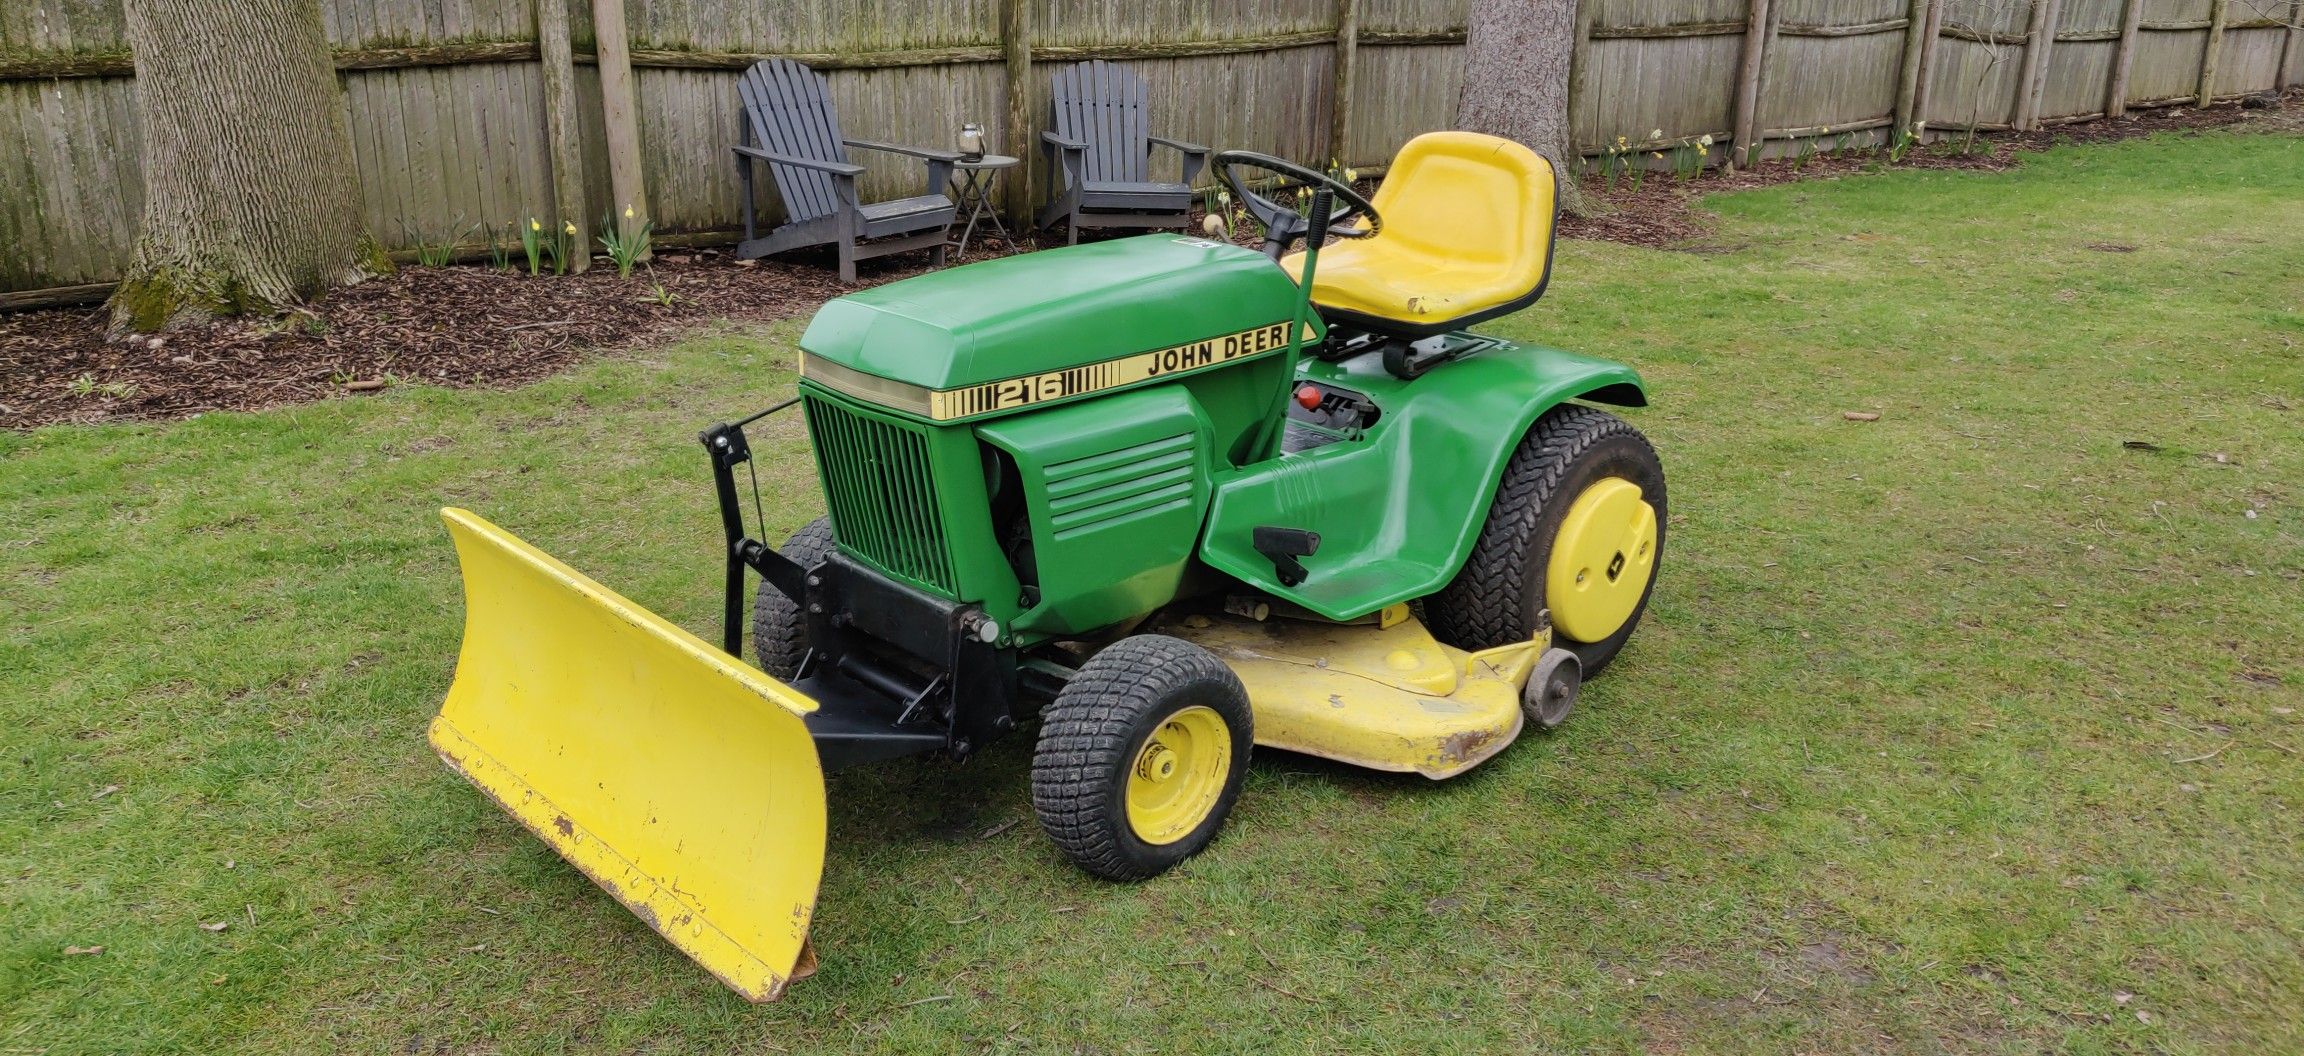 John Deere refurbished 216 with accessories and 214 parts tractor